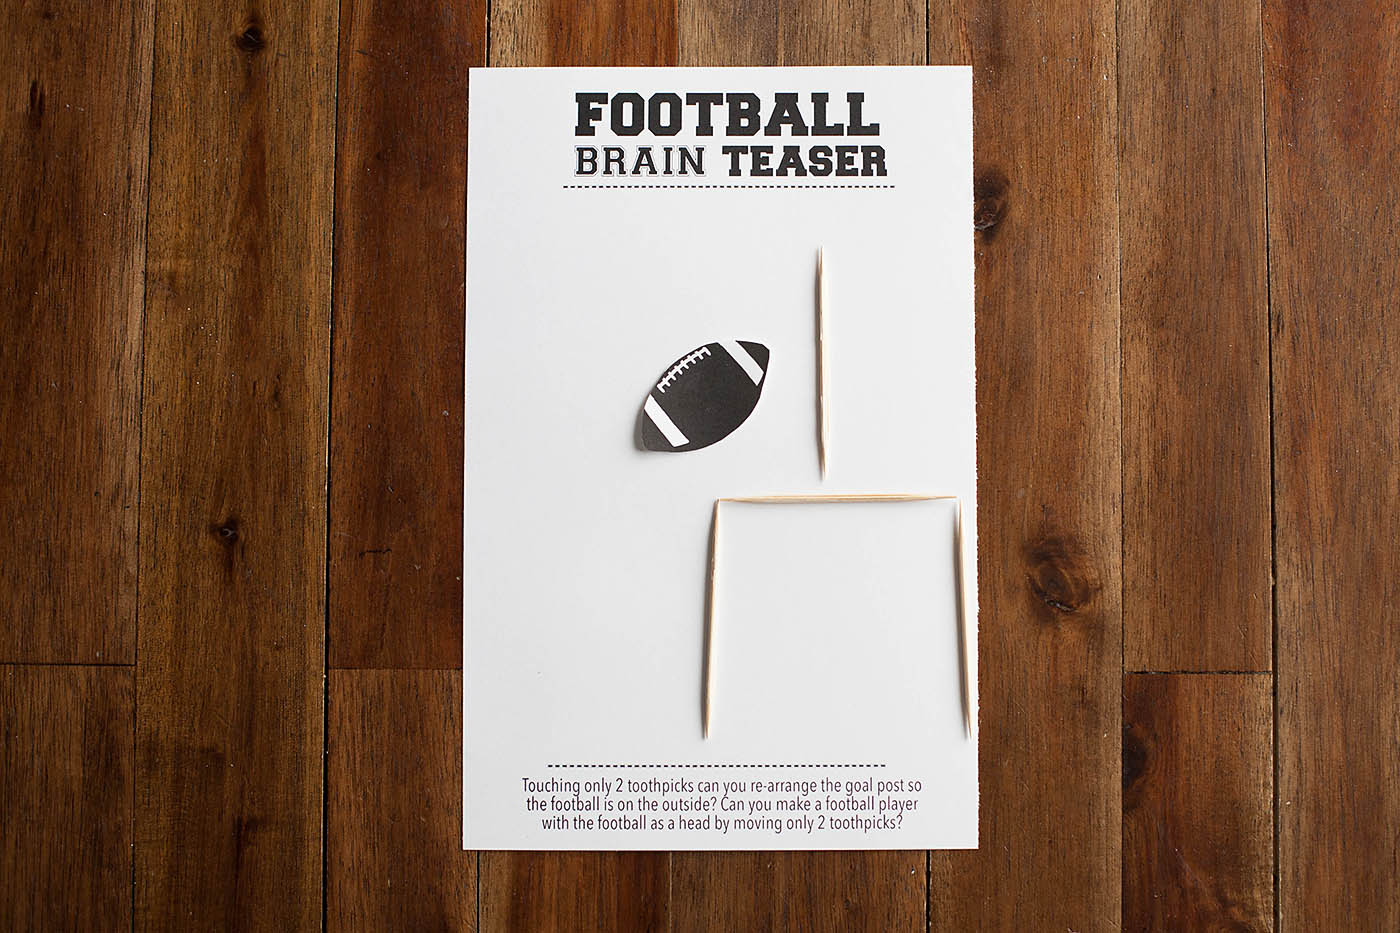 Printable football brain teaser - perfect for a Super Bowl or football party!